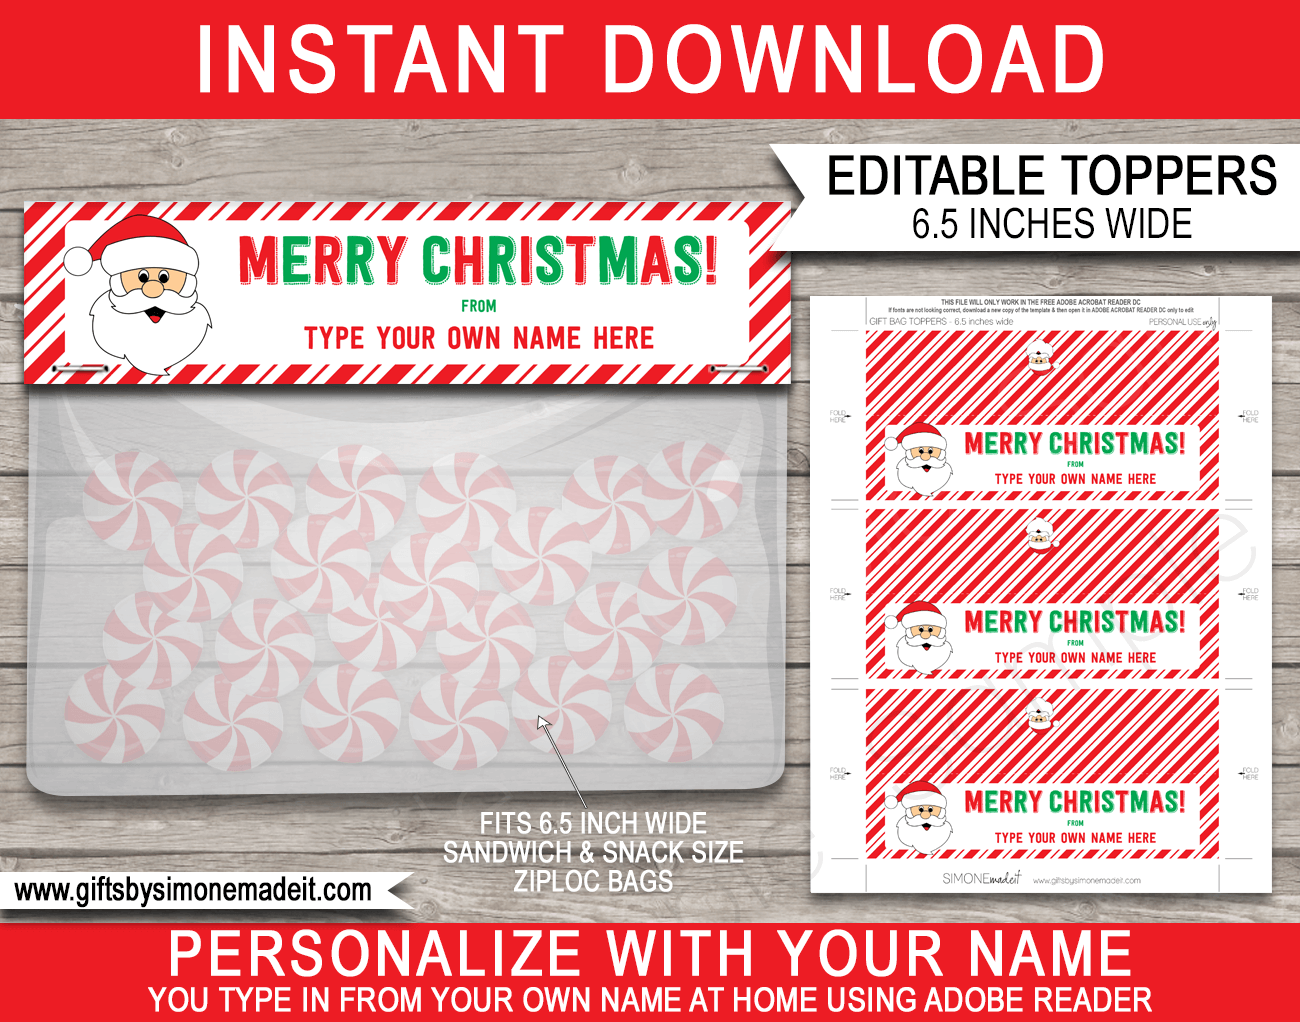 https://www.giftsbysimonemadeit.com/wp-content/uploads/2020/11/Christmas-Gift-Bag-Toppers-6.5-inch-Printable-Template-santa.png